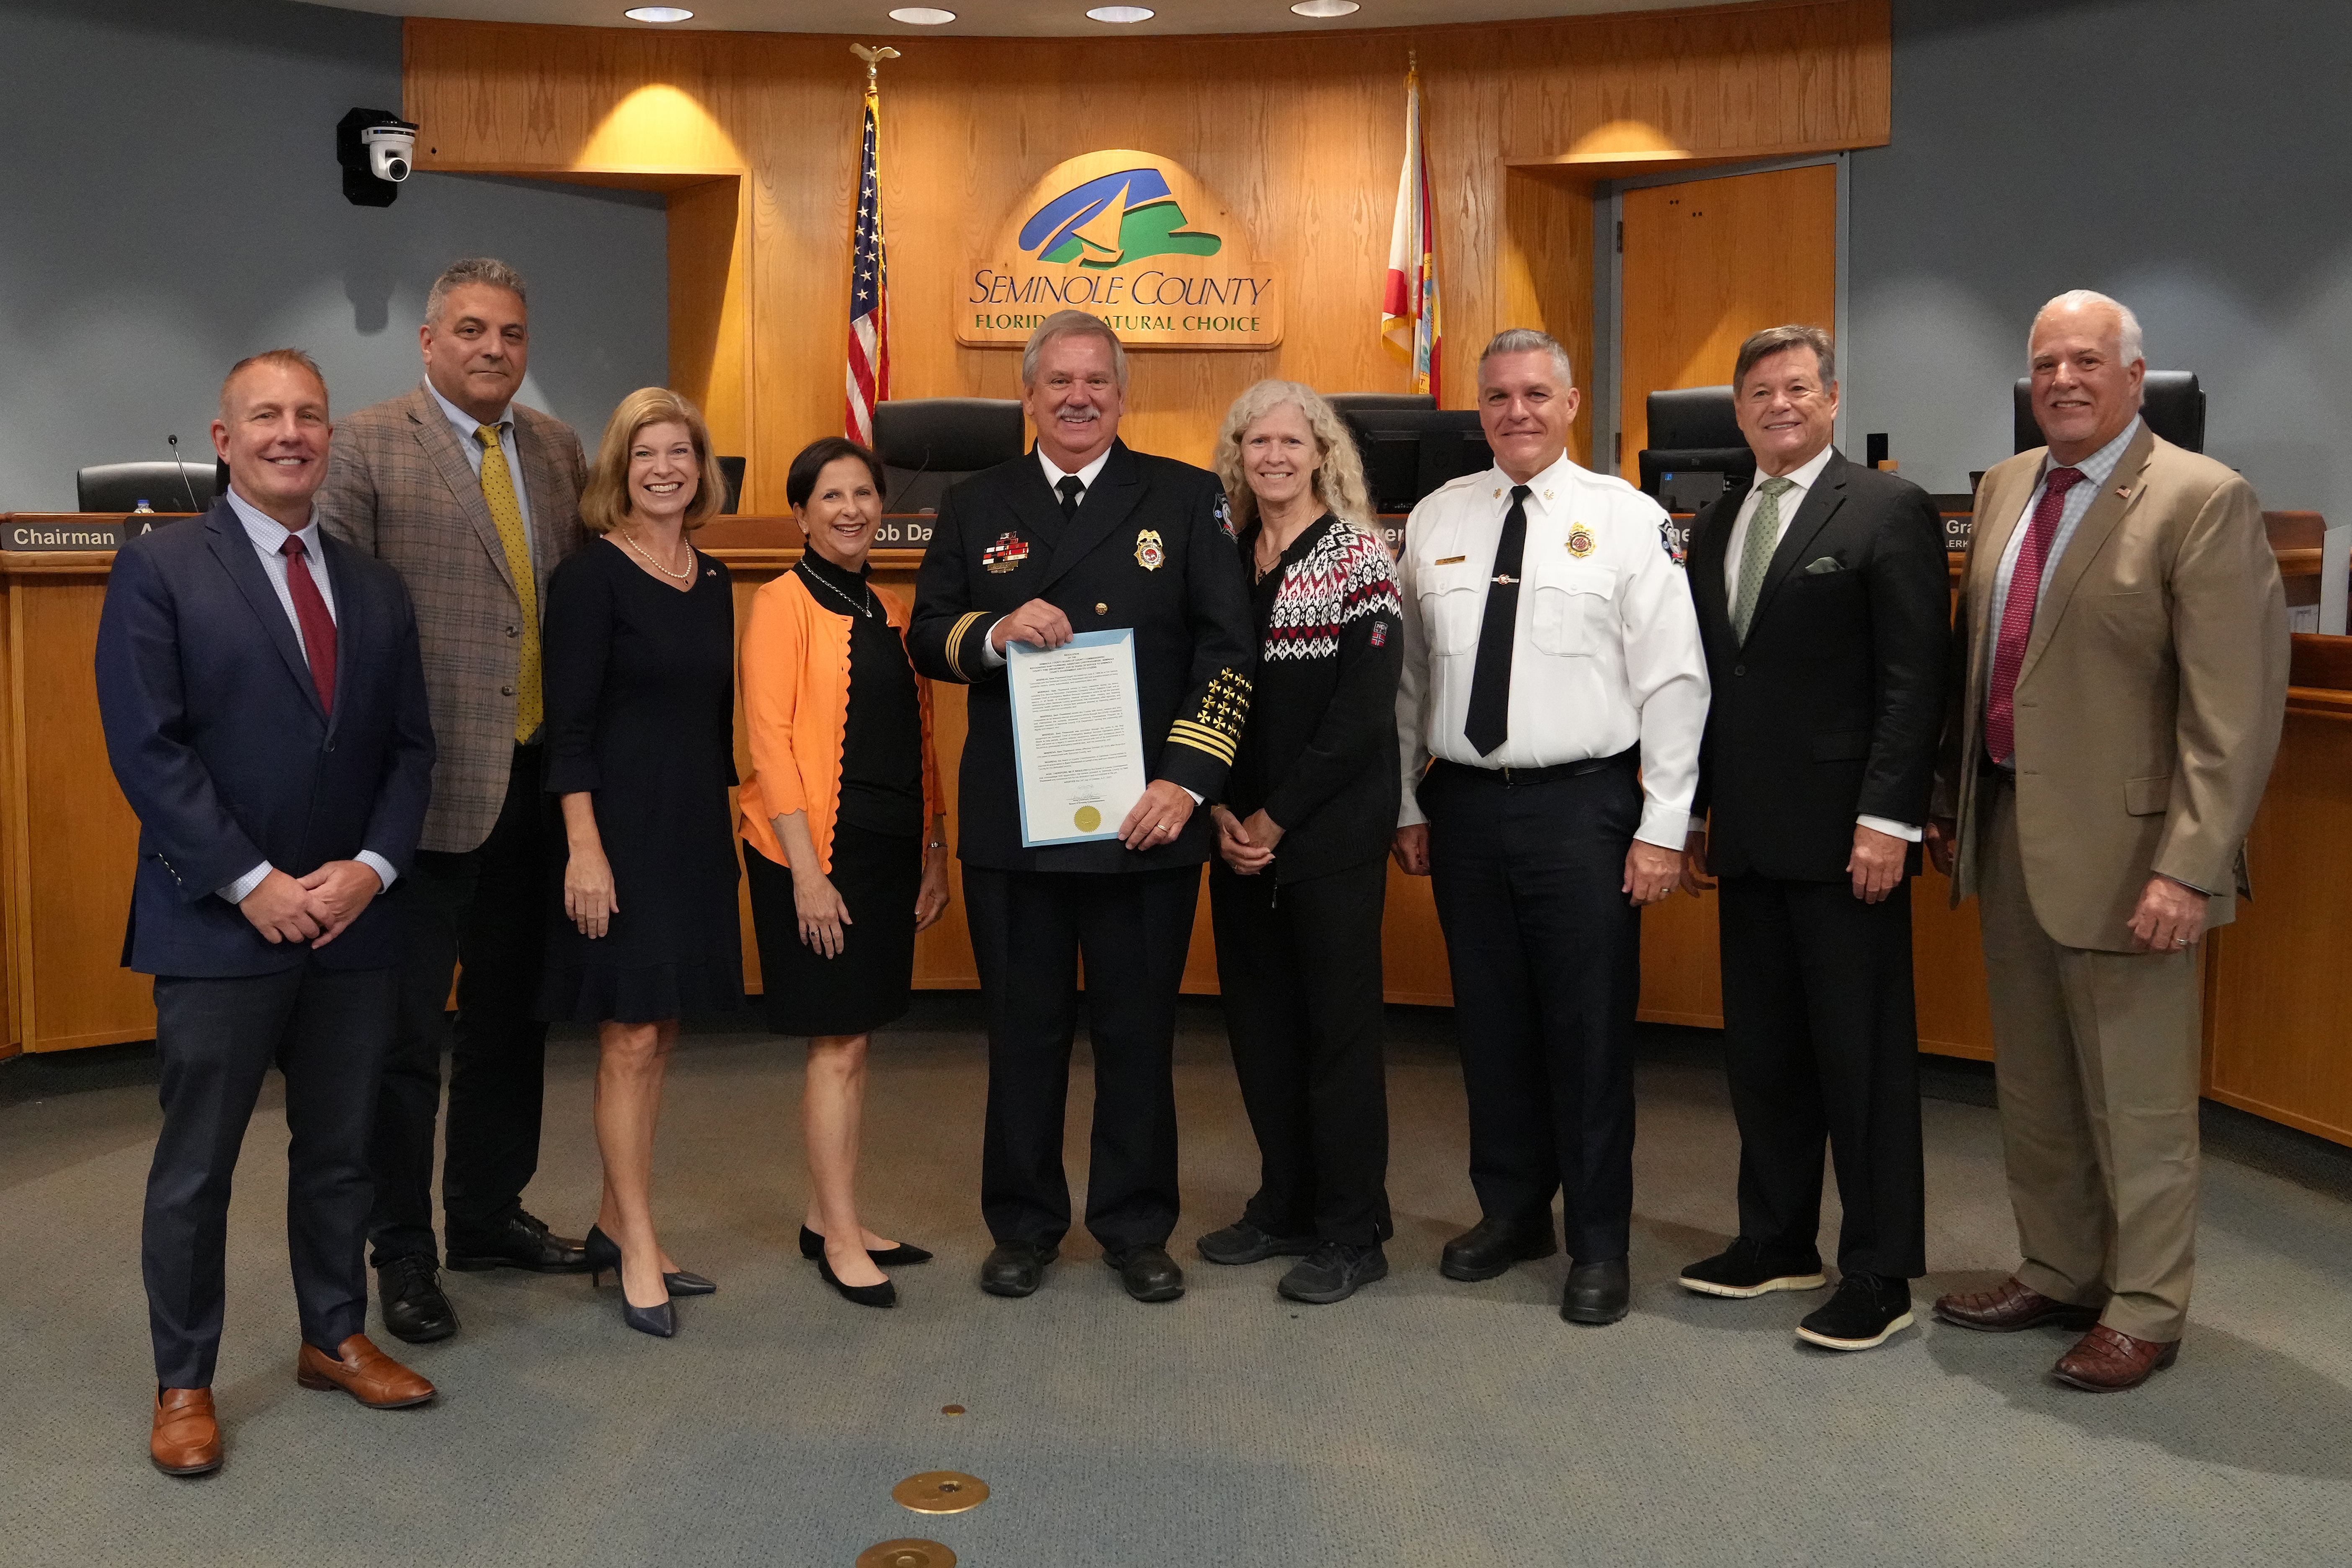 Recognizing Sam Thurmond, Assistant Chief/Paramedic, for 39 years of service to Seminole County Government and its citizens (Sam Thurmond, Assistant Chief/Paramedic)